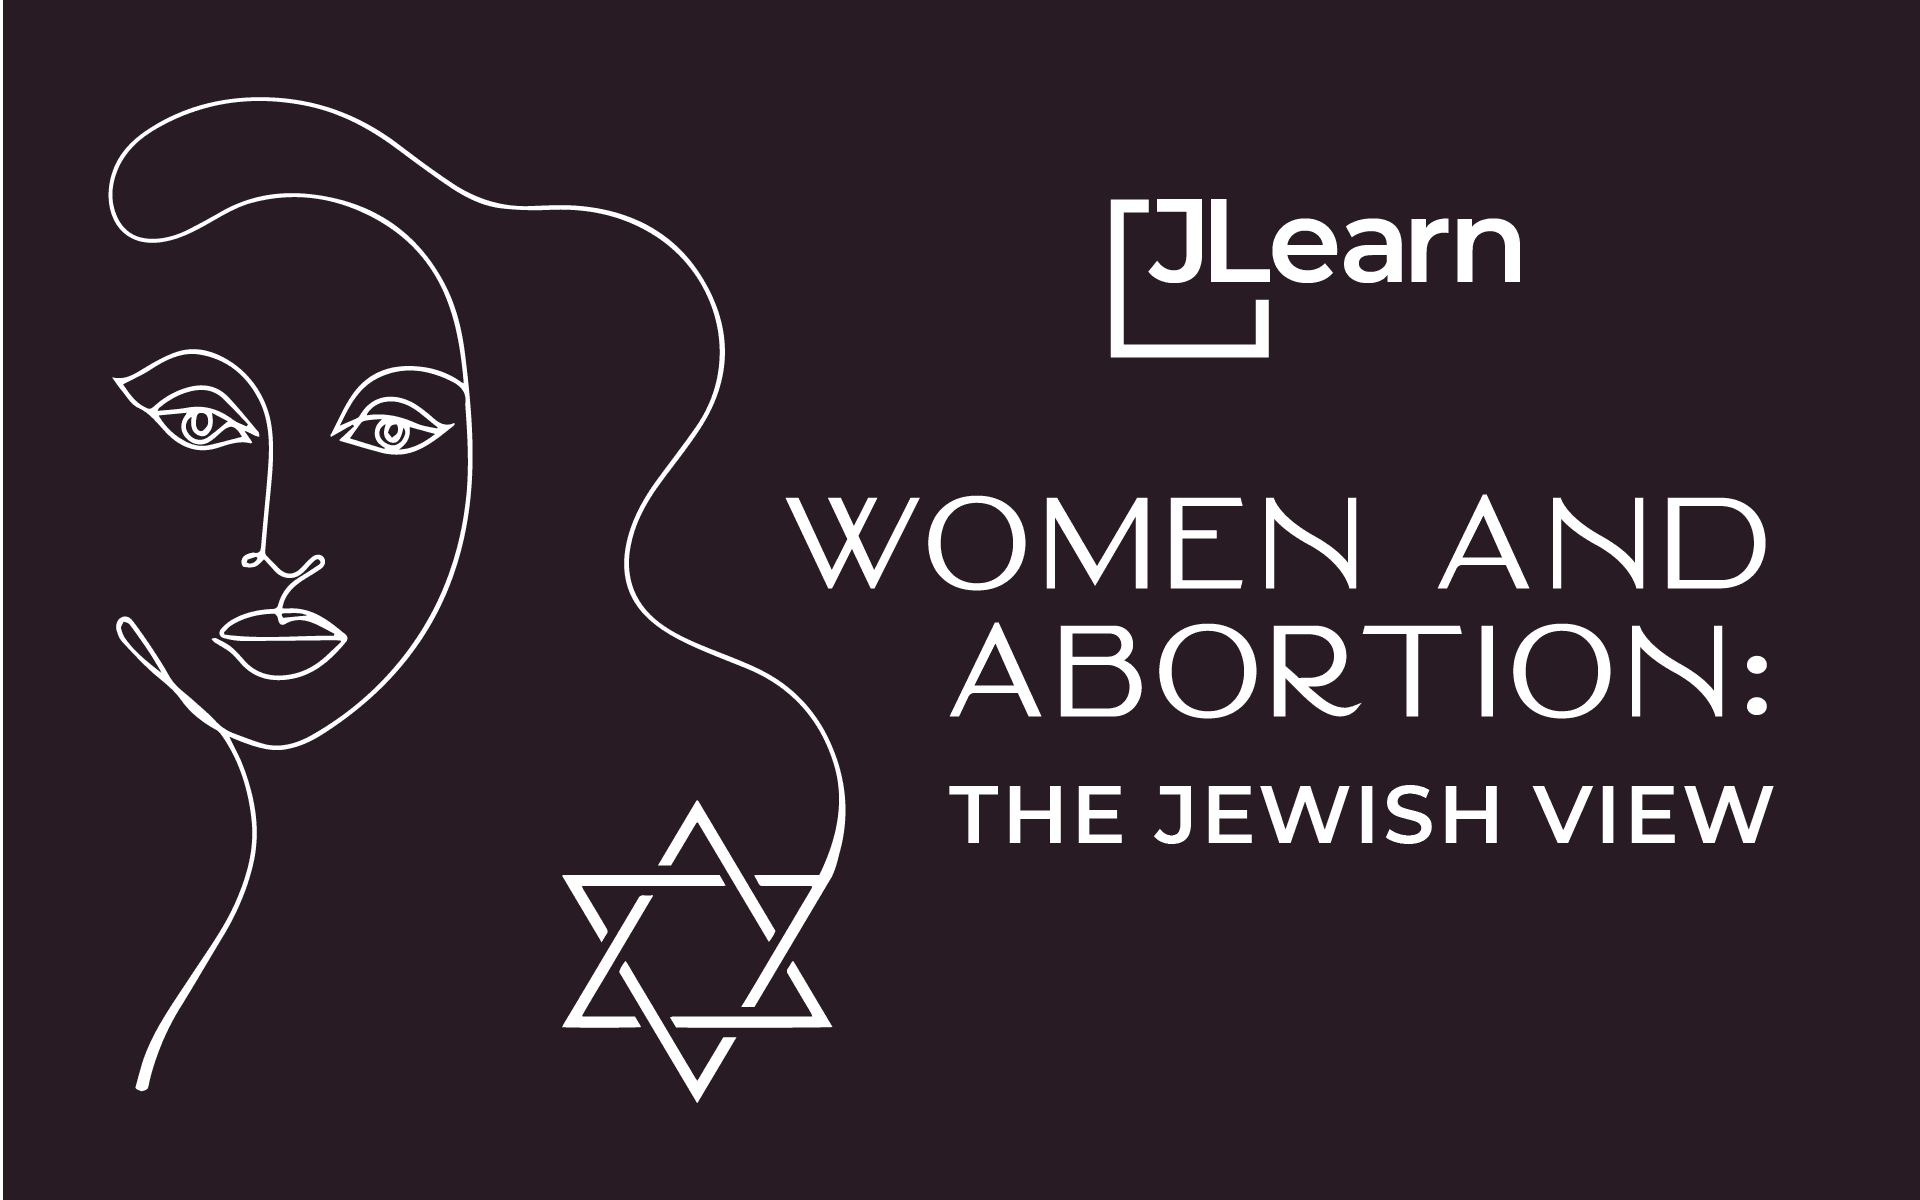 22.jlearn.abortion-image-card-5@2x-20220518-202813.png